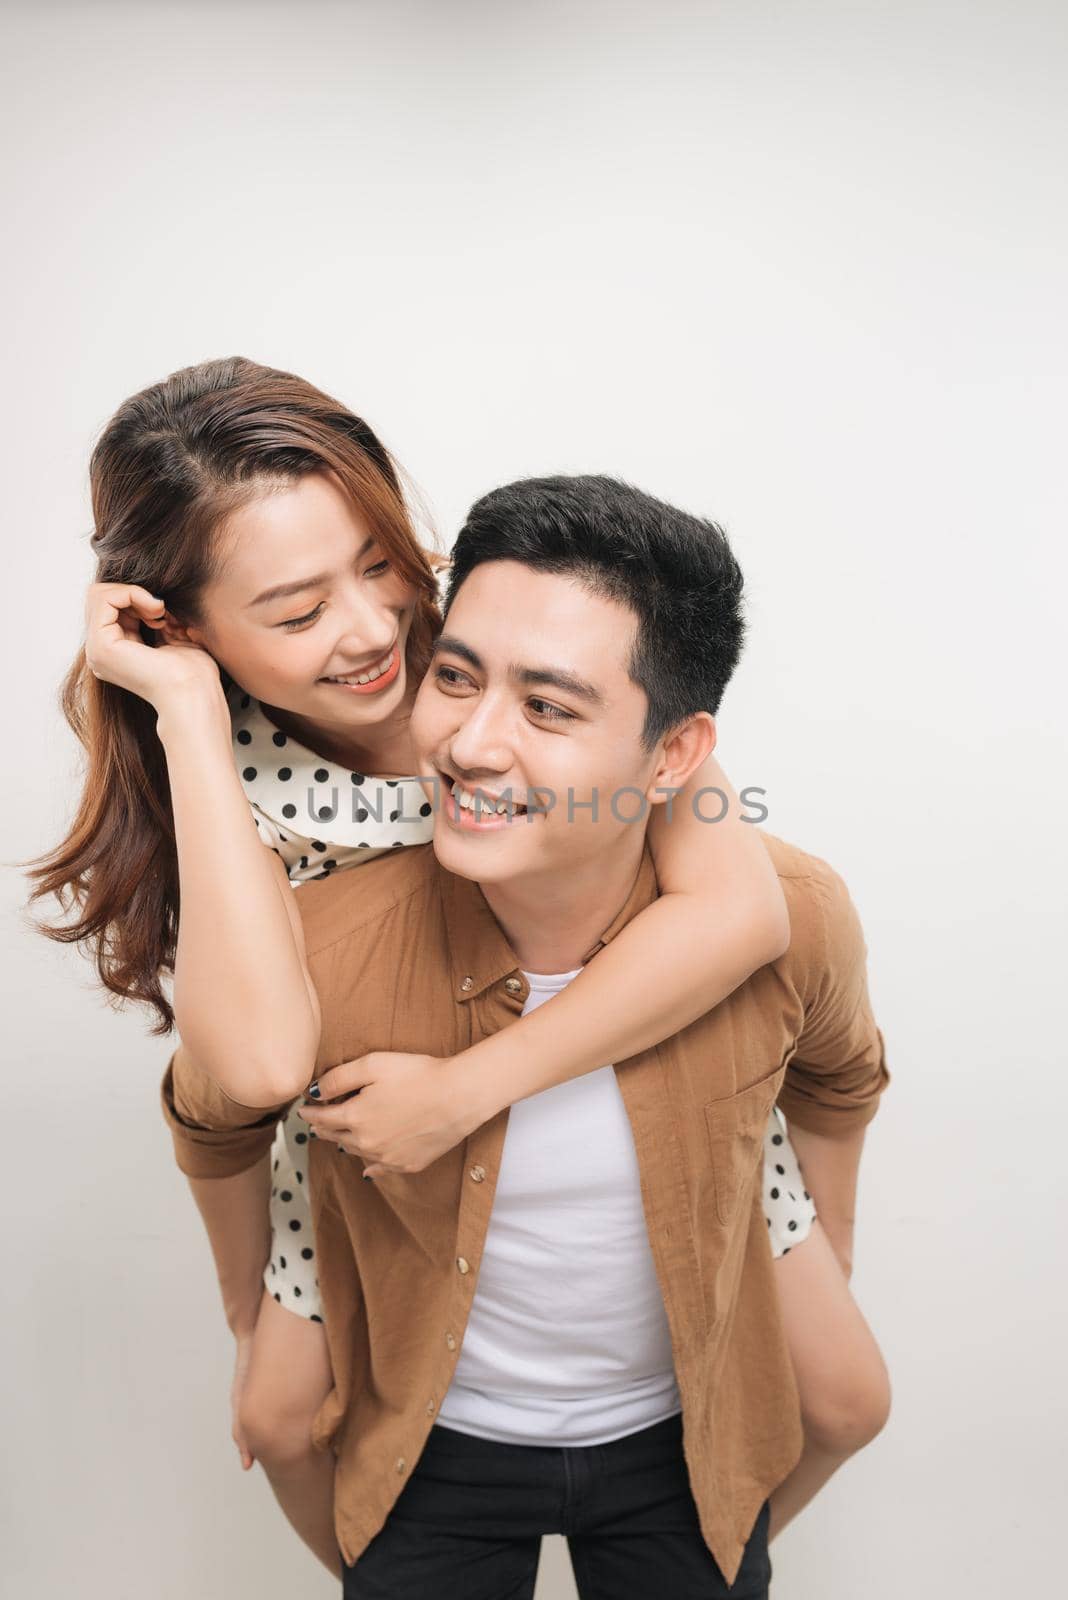 man carrying his lover on back, woman showing peace symbol over white background